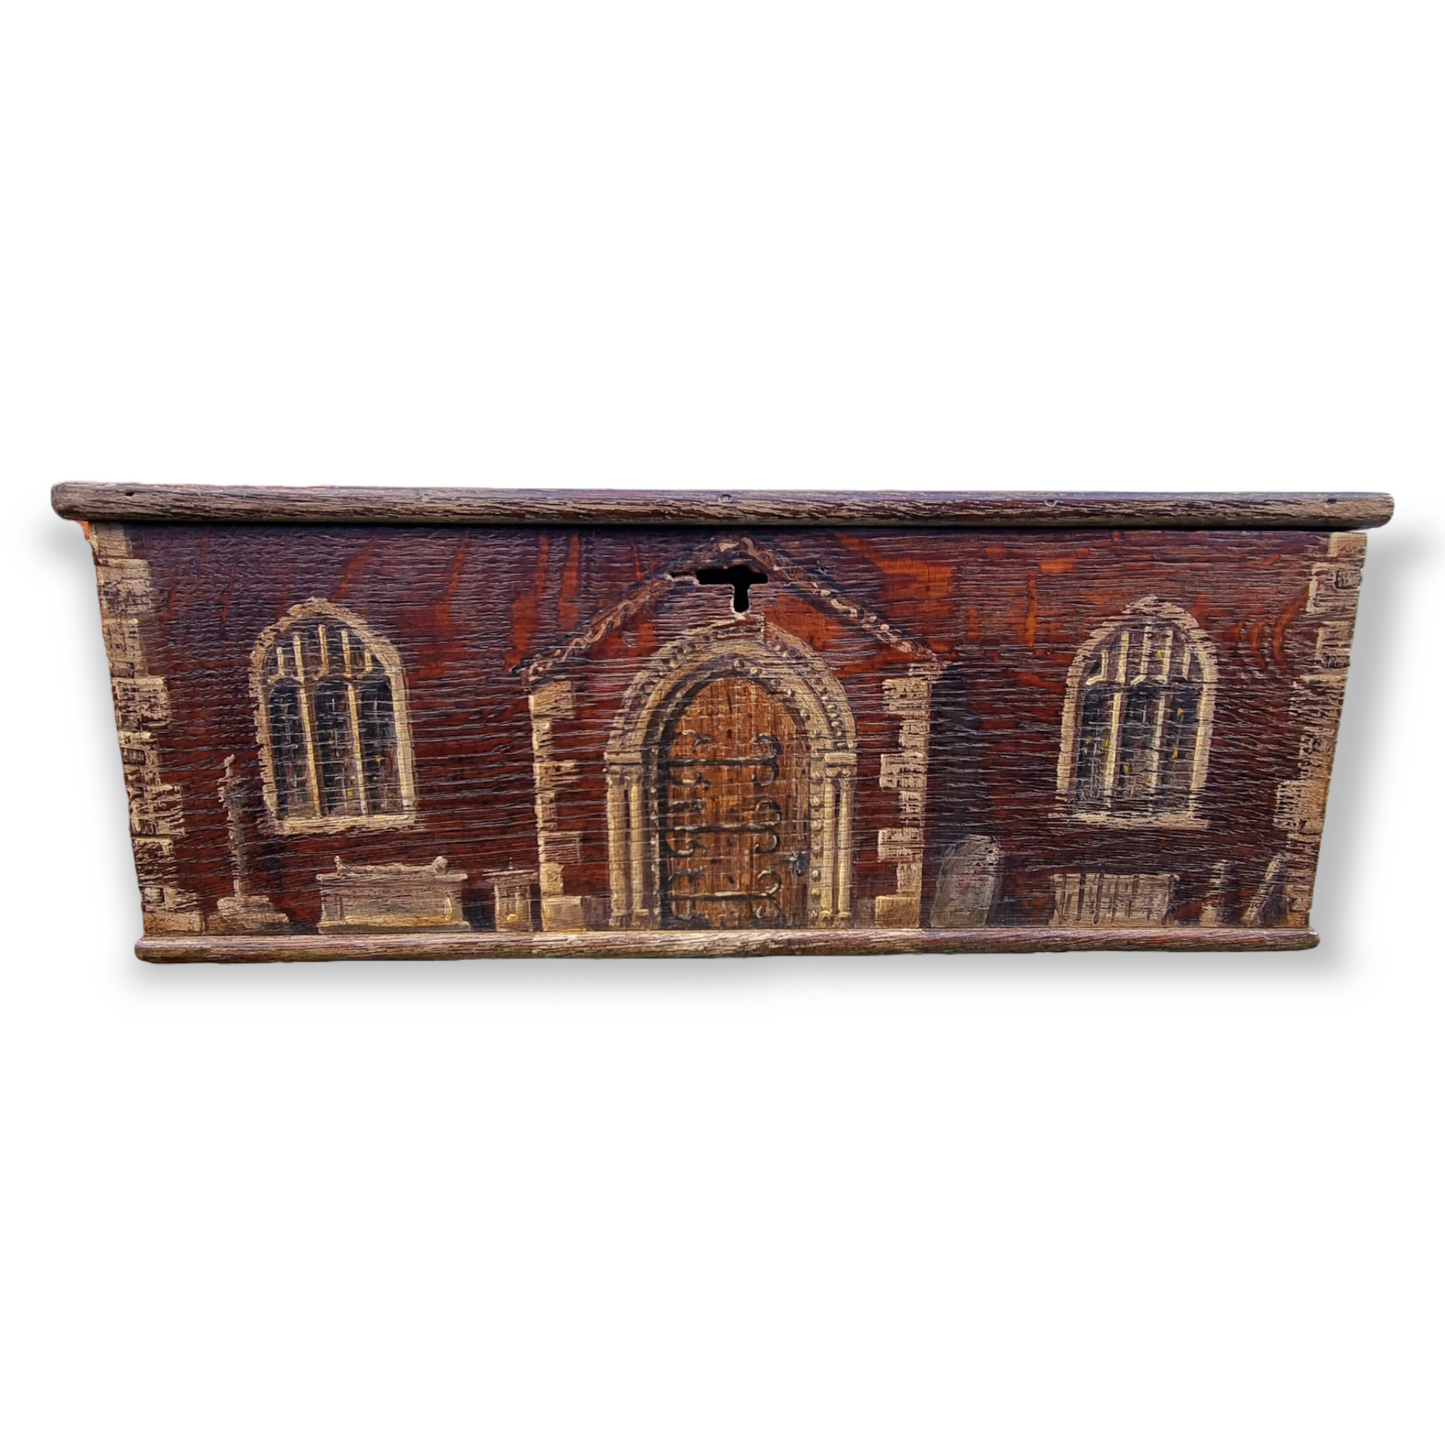 Early 19th Century English Antique Oak Boarded Box With Folk Art Painted Gothic Scene